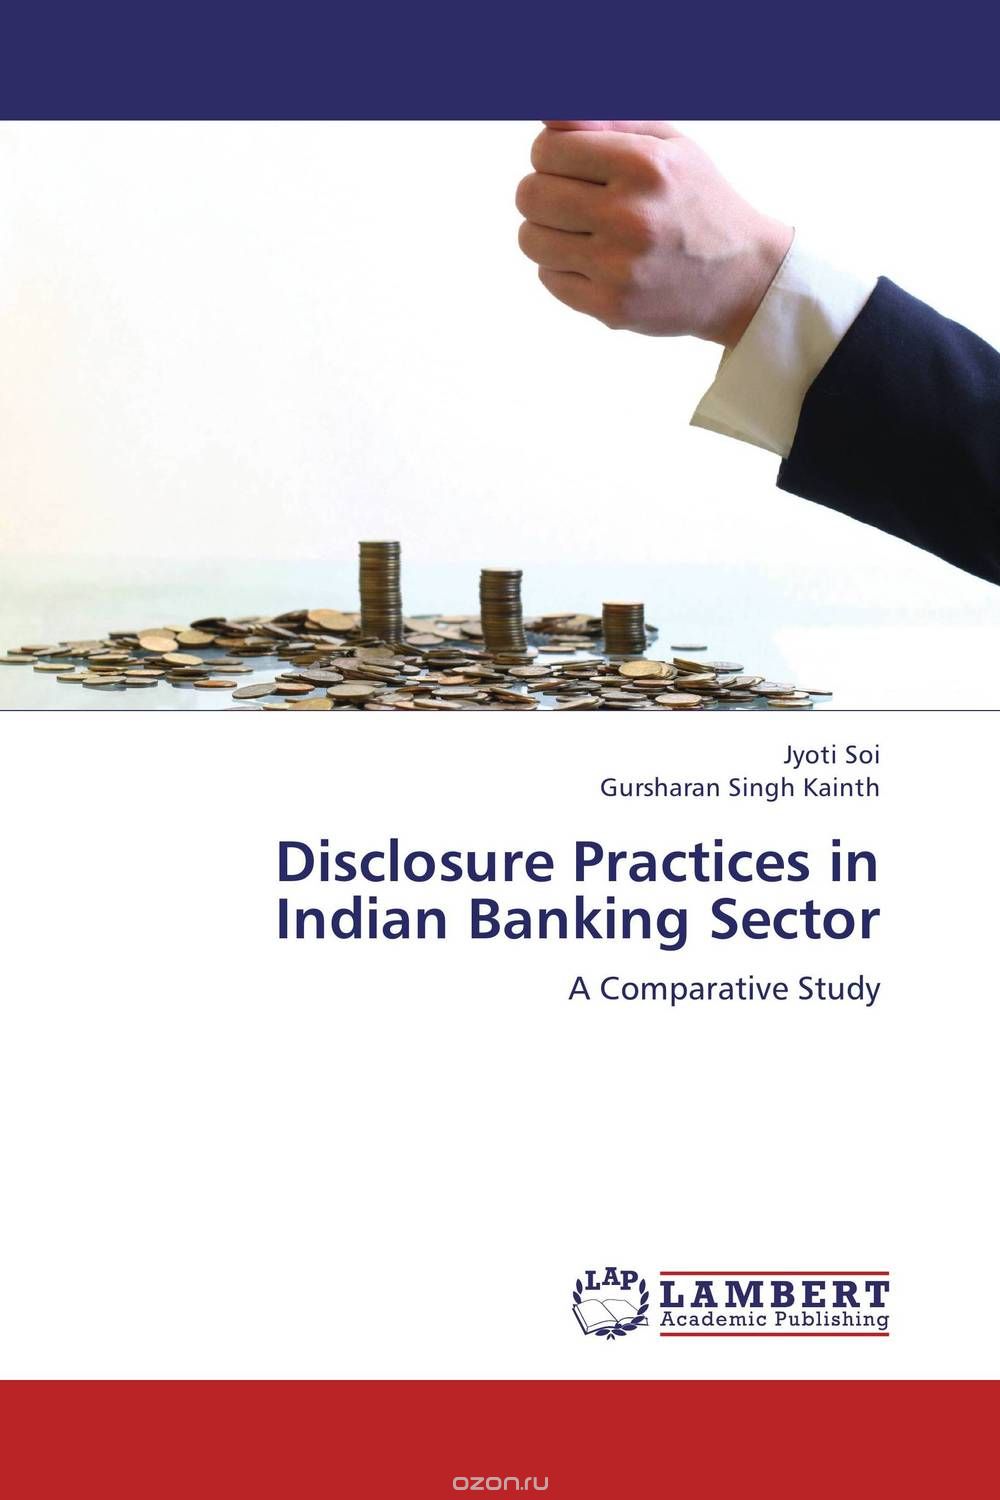 Скачать книгу "Disclosure Practices in Indian Banking Sector"